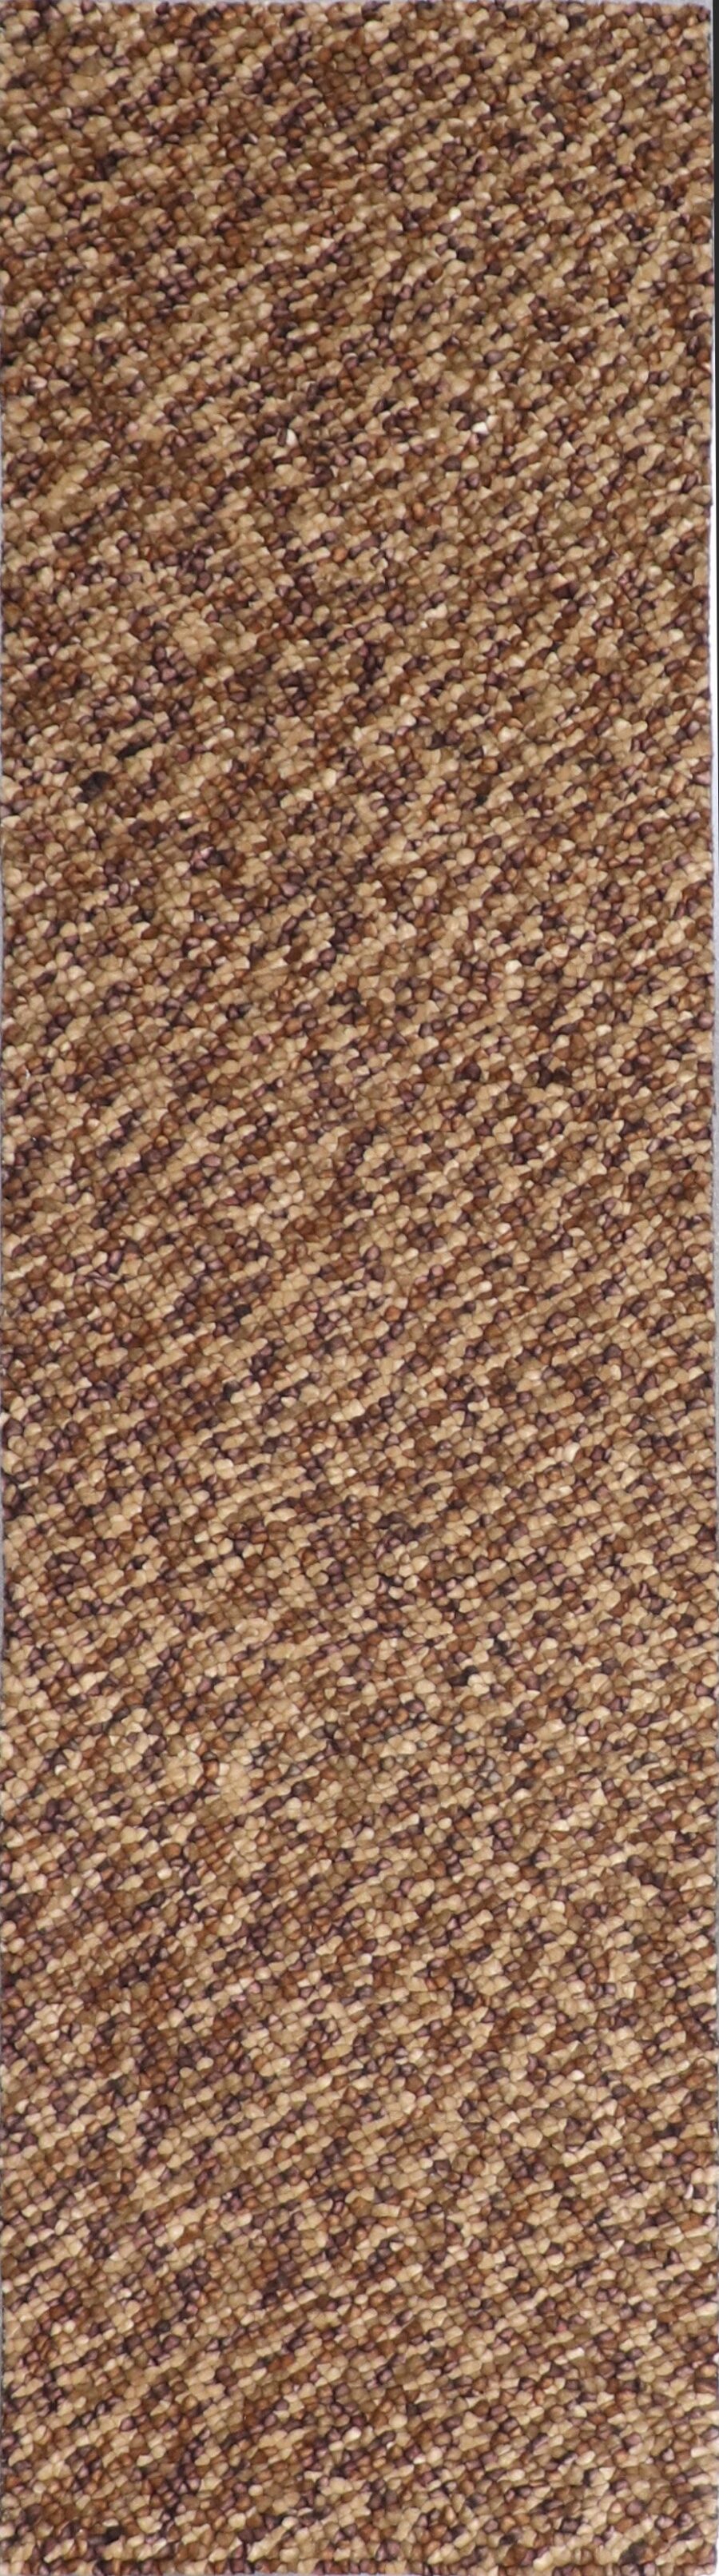 2'5"x9'4" Contemporary Wool Hand-Tufted Rug - Direct Rug Import | Rugs in Chicago, Indiana,South Bend,Granger